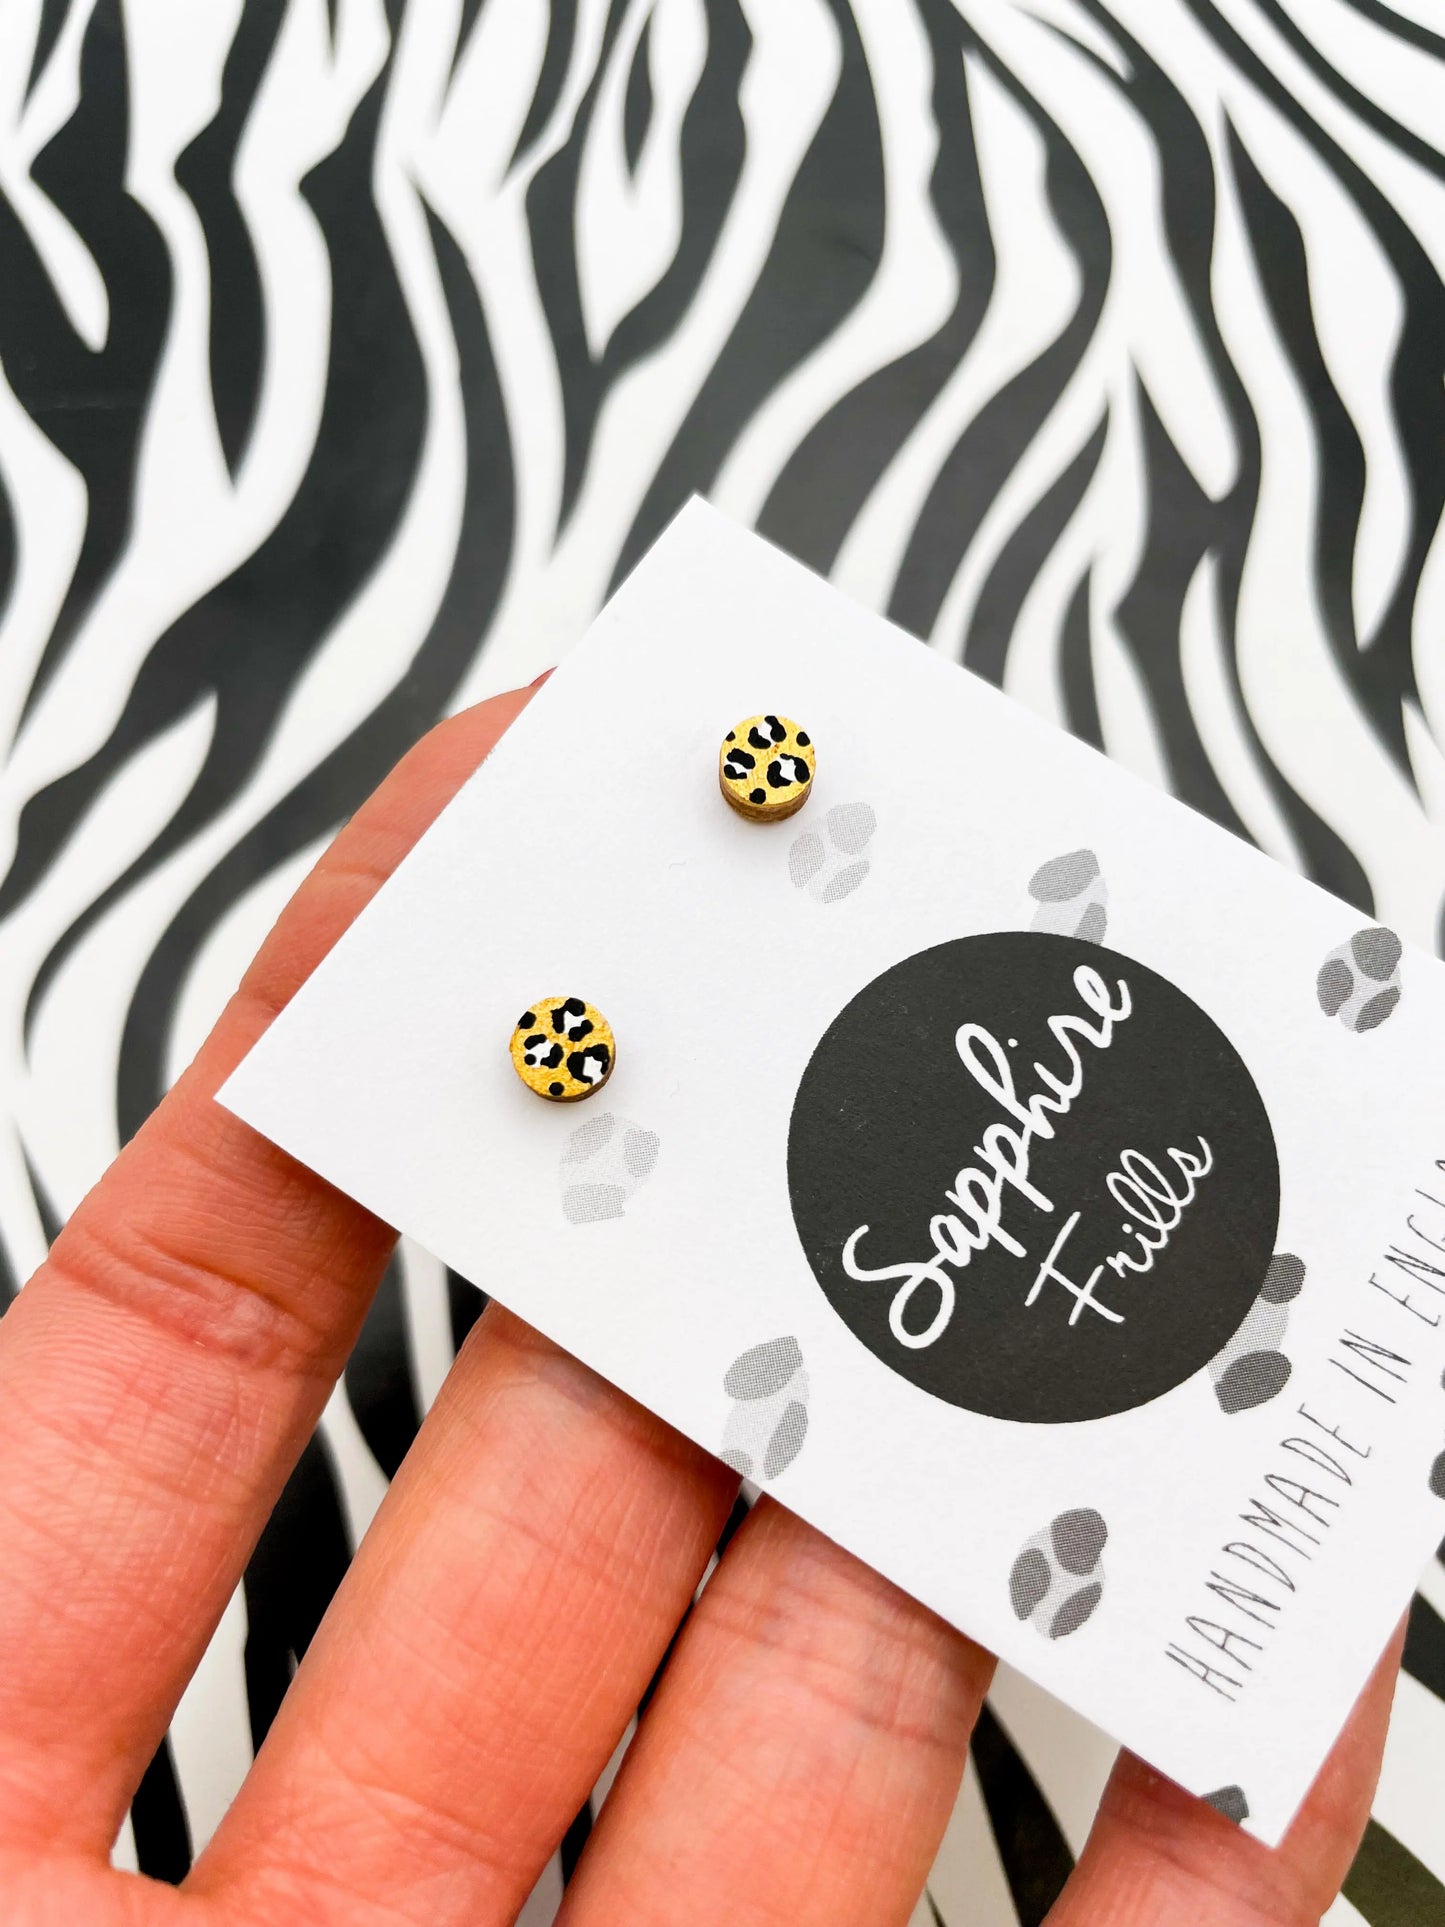 Micro Gold and White Leopard Print Wood Circle Stud Earrings from Sapphire Frills